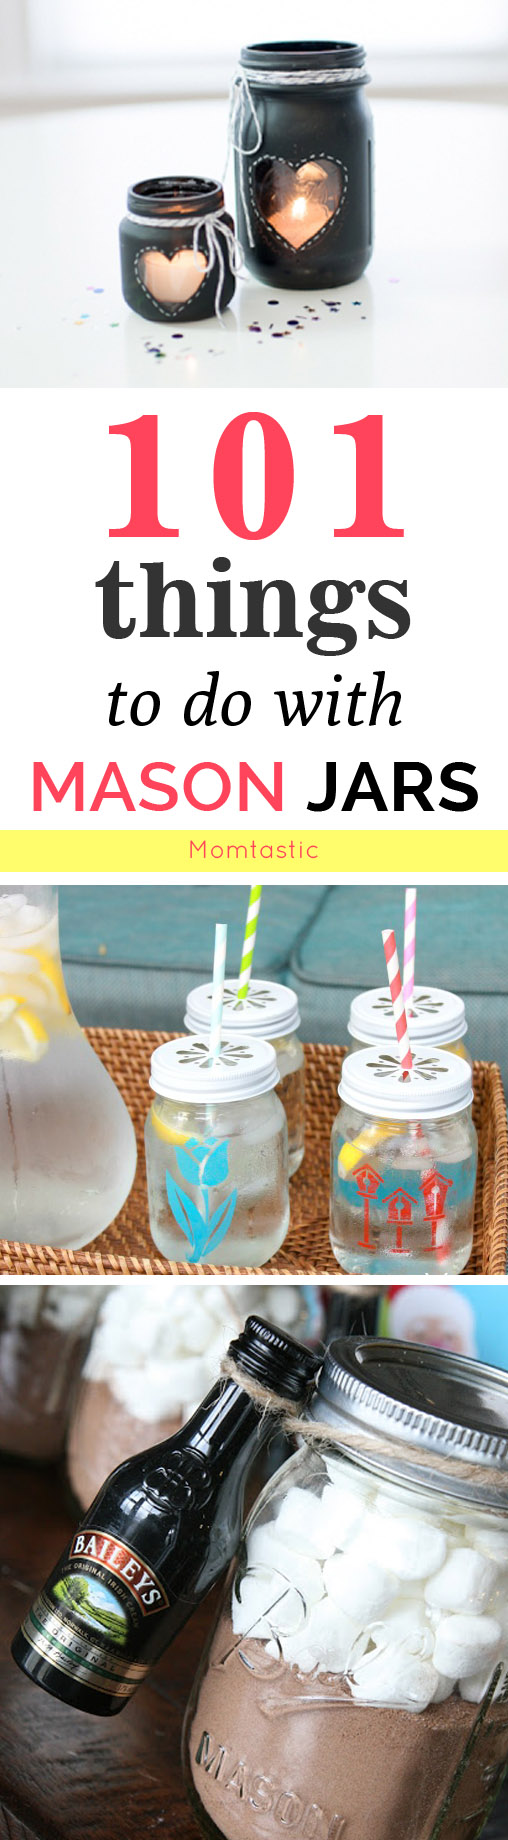 101_things_to_do_with_mason_jars